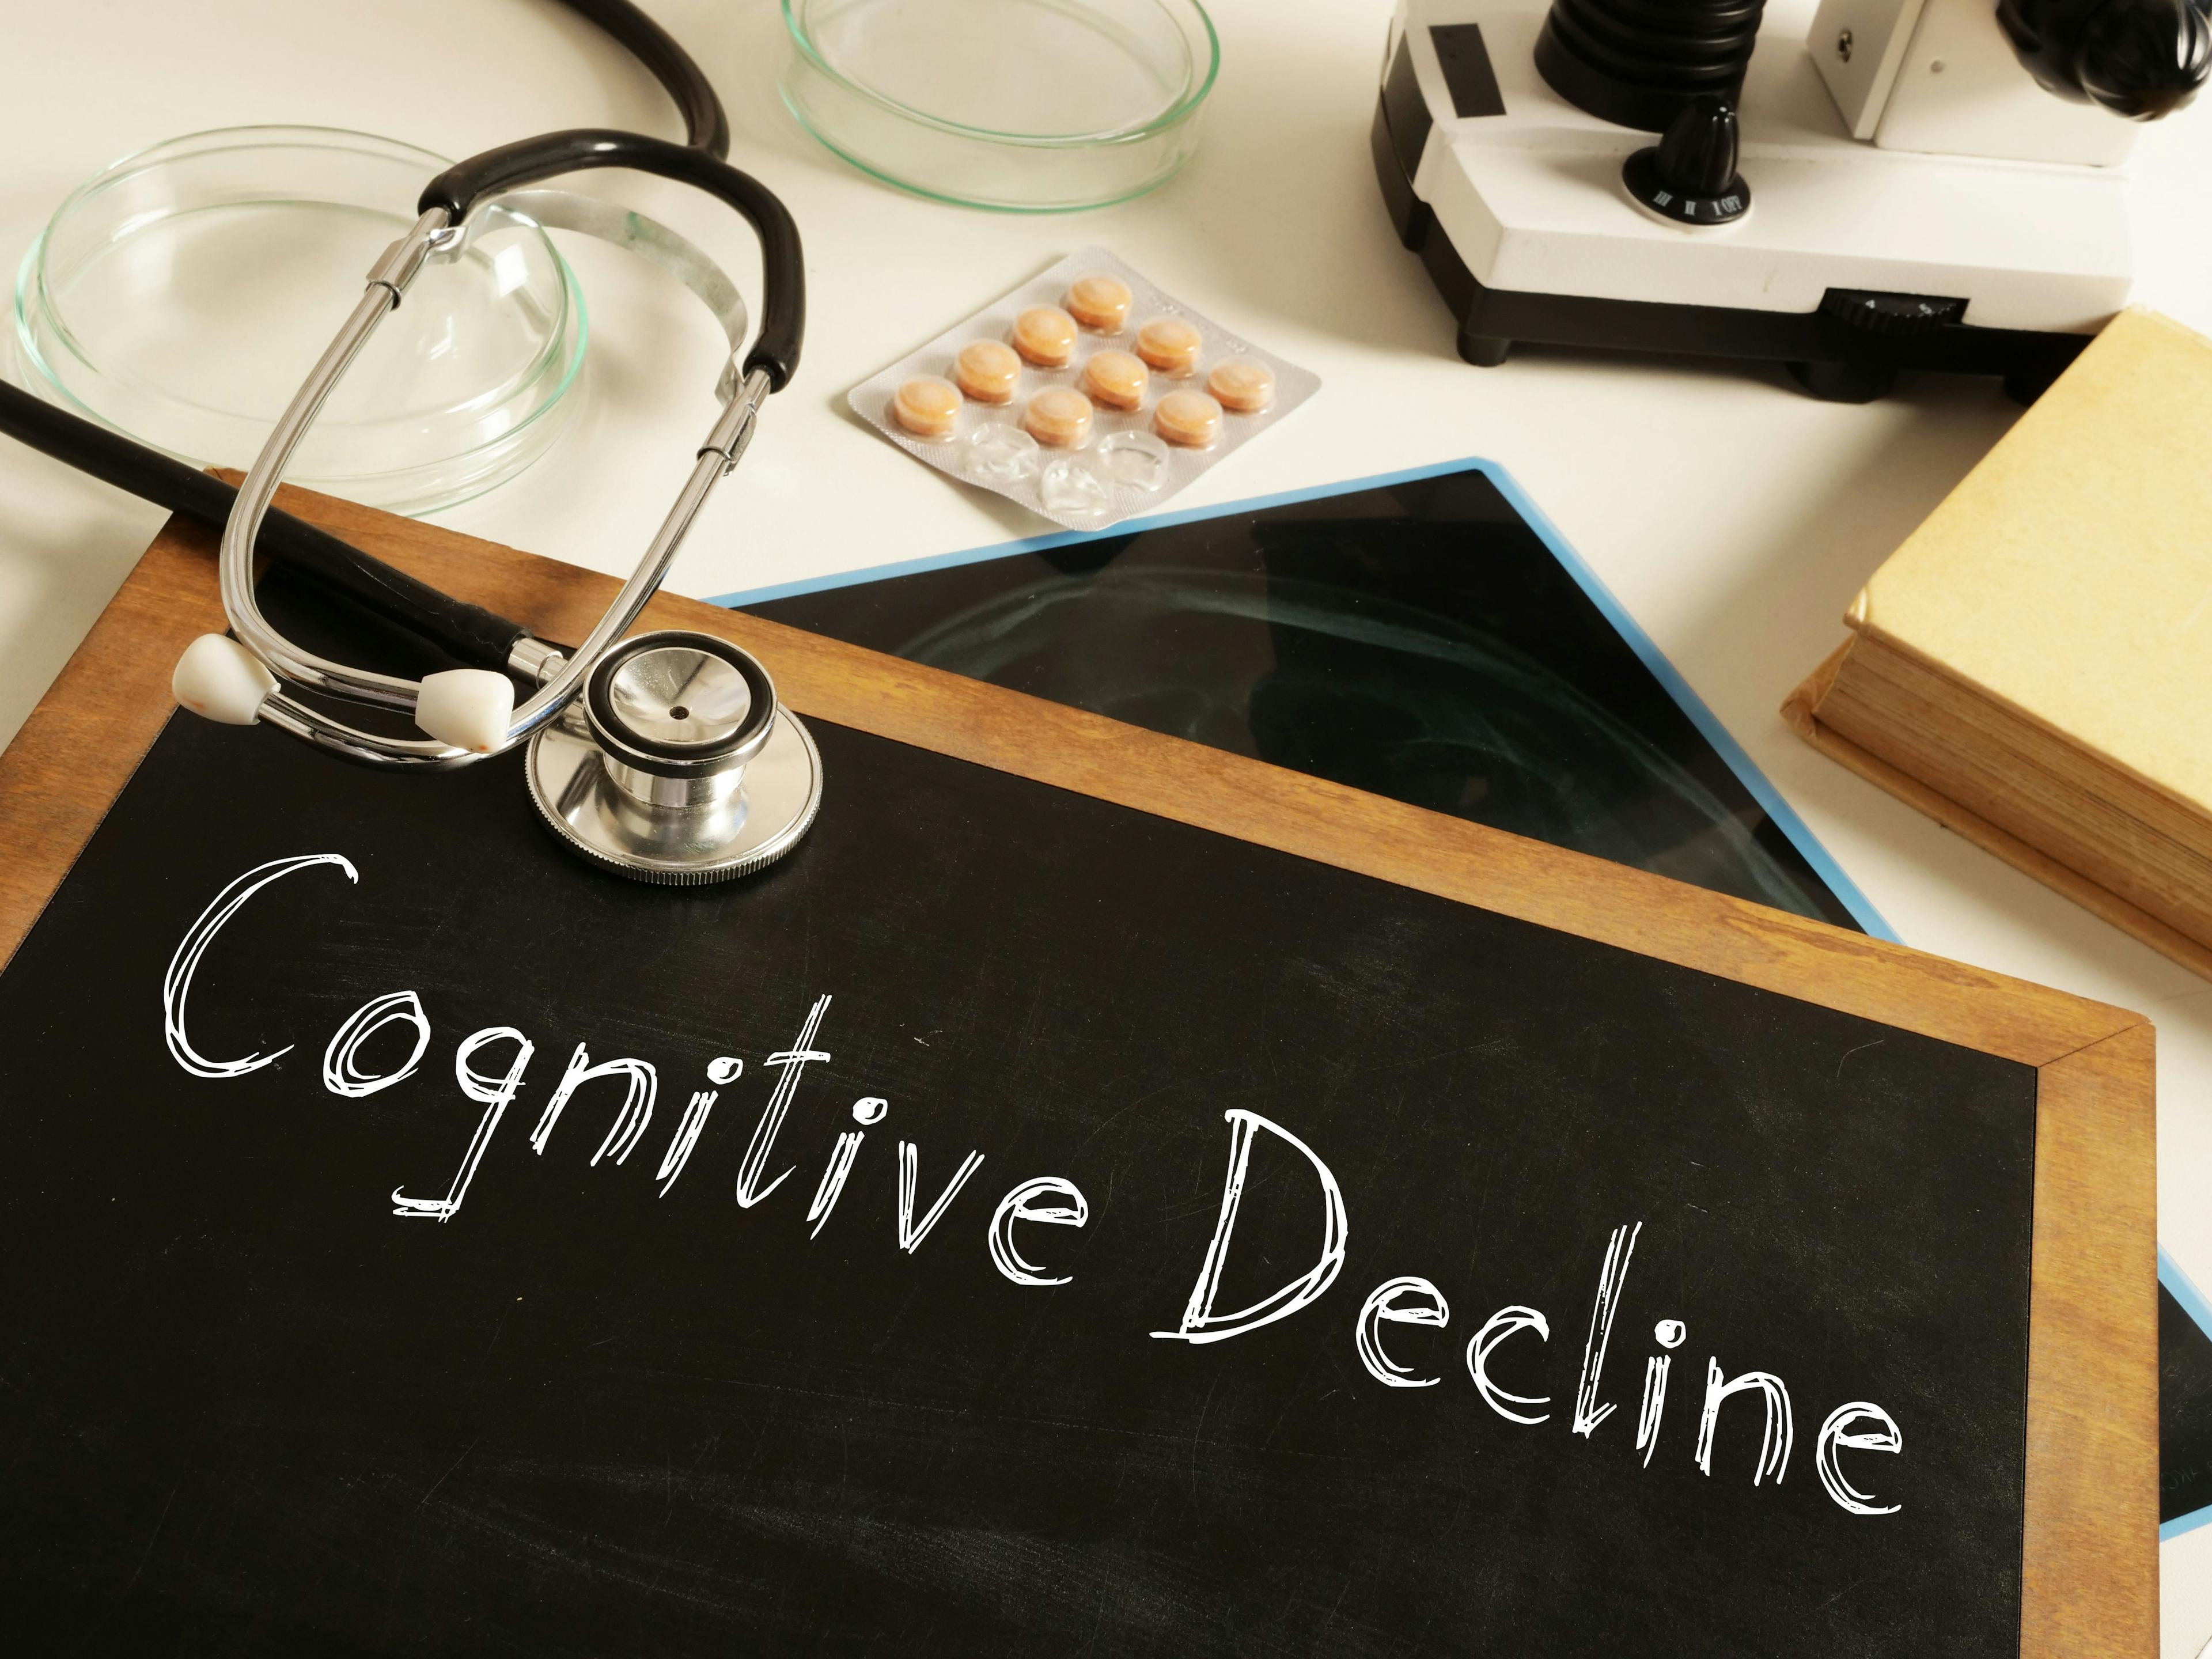 Cognitive Decline Written on Chalk Board | image credit: Andrii - stock.adobe.com